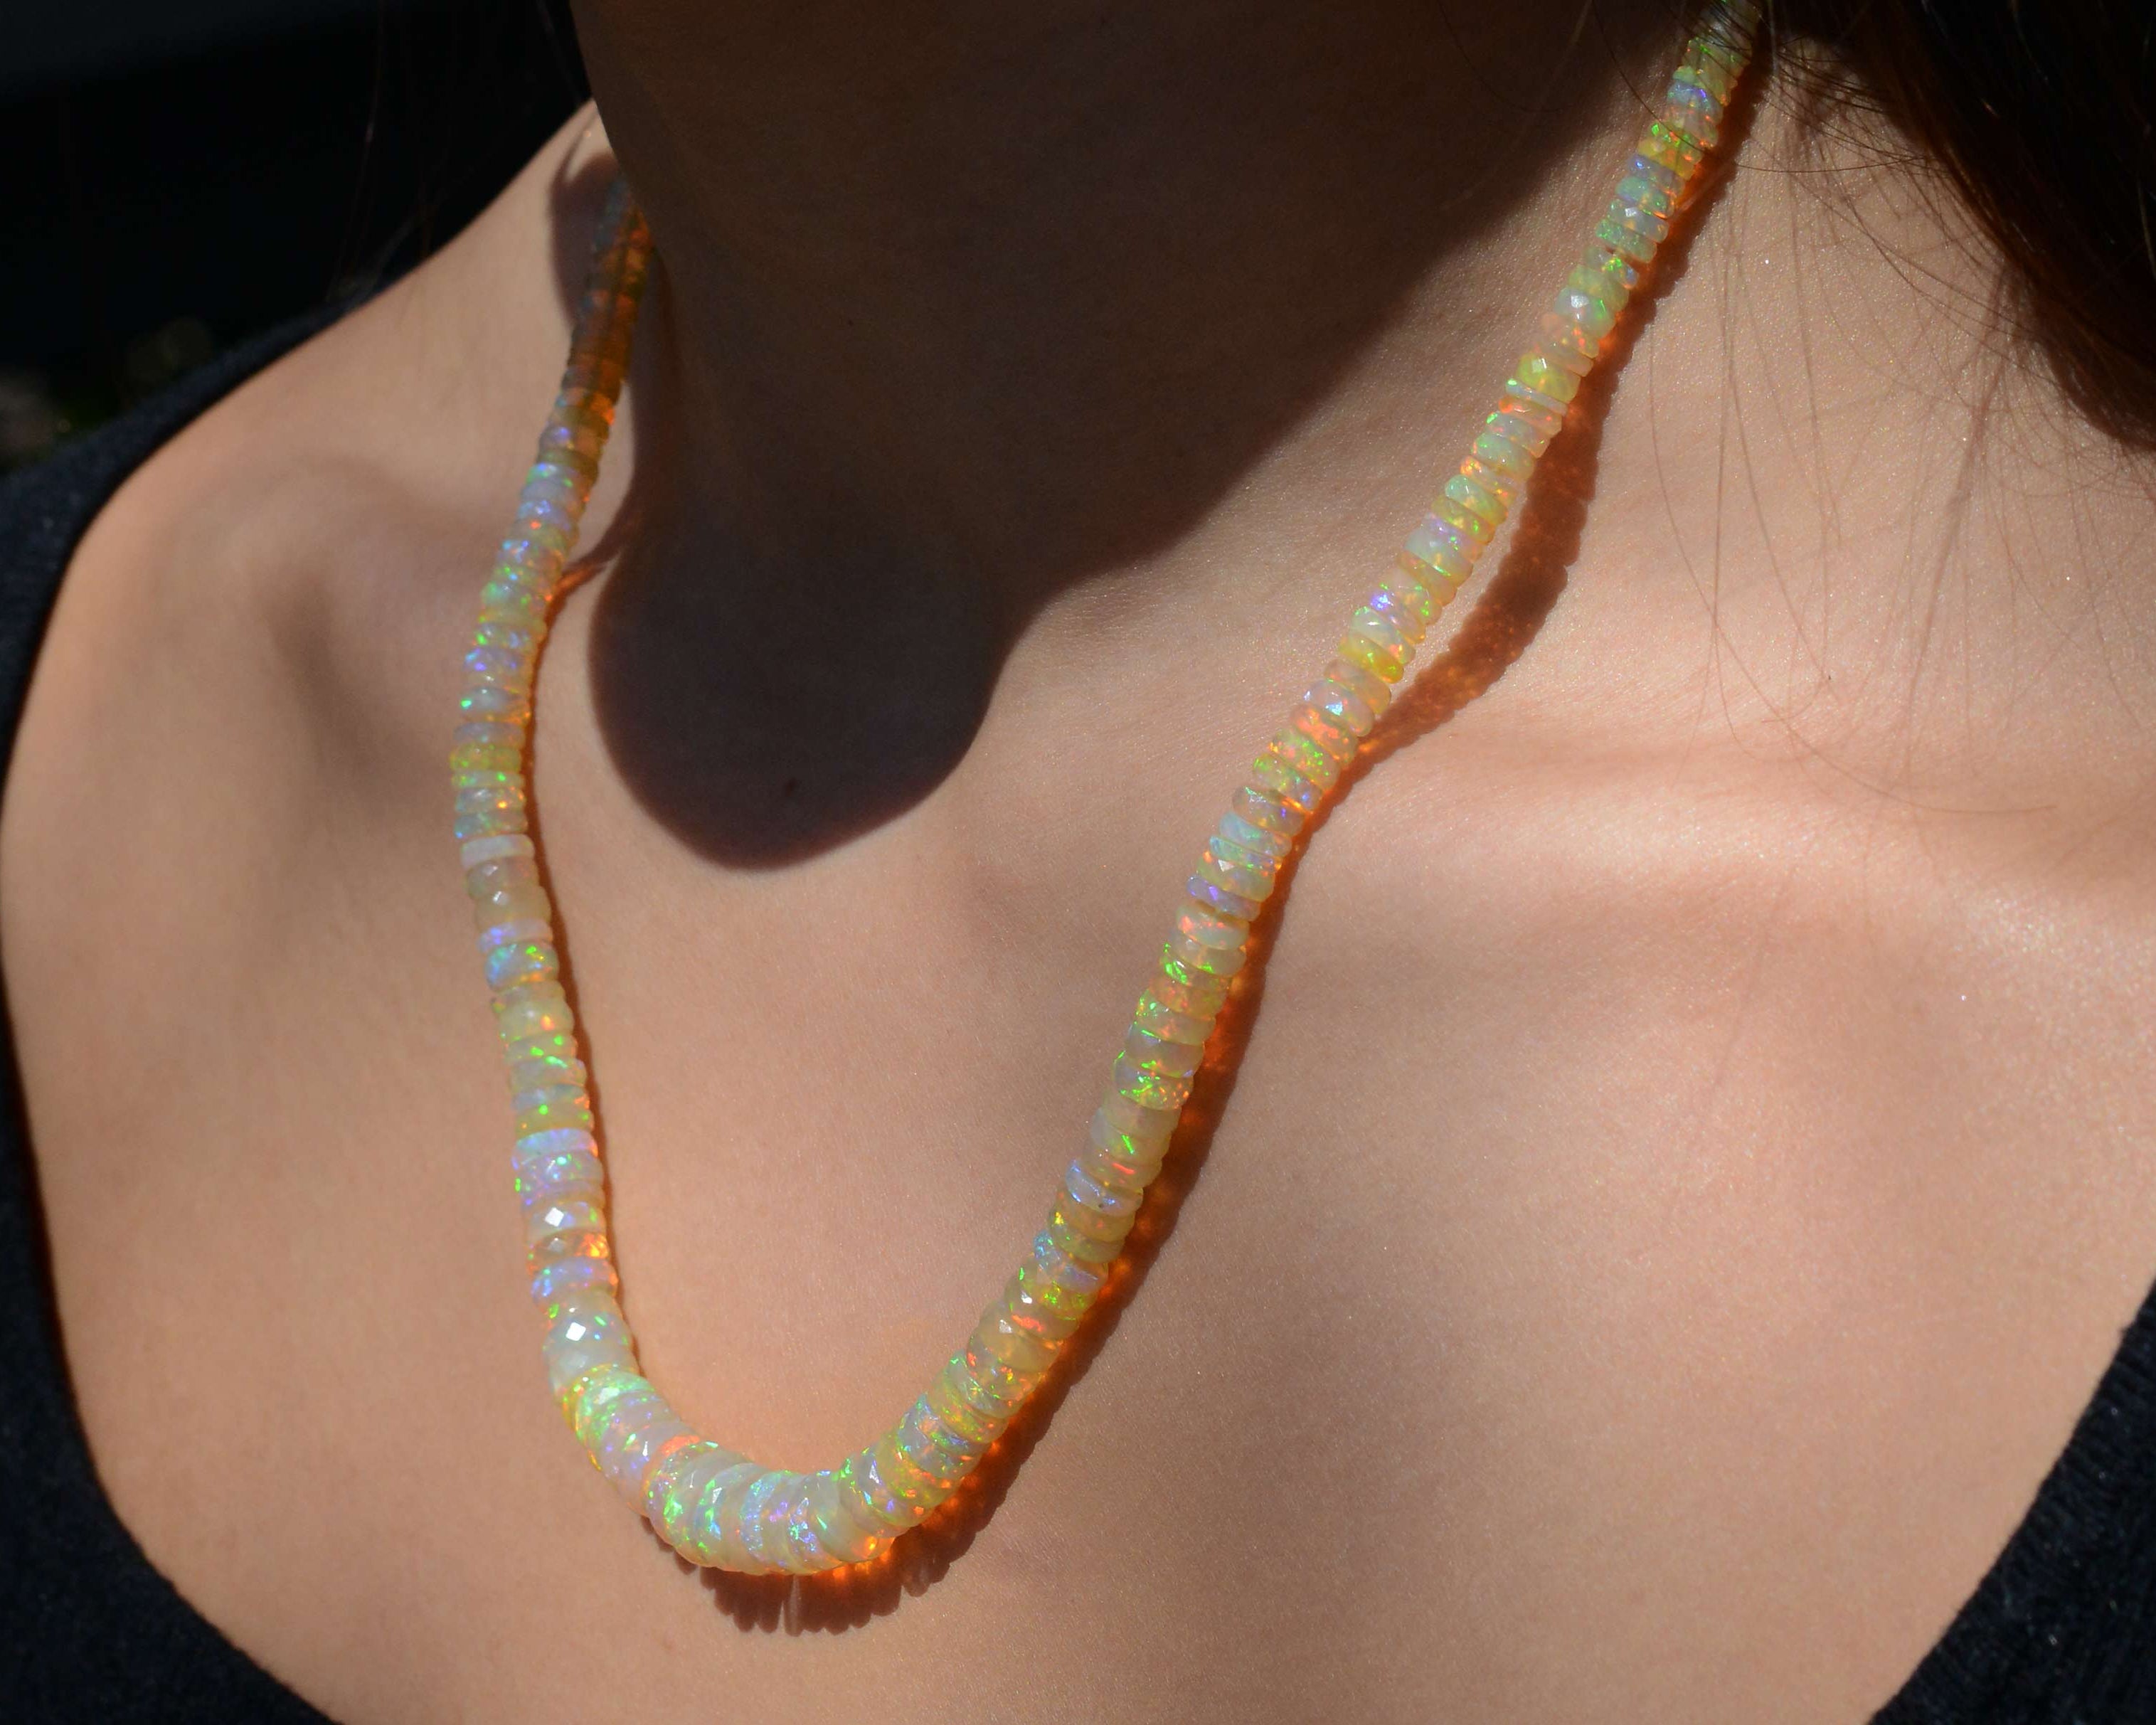 New 42 Carat Opal Beads Necklace